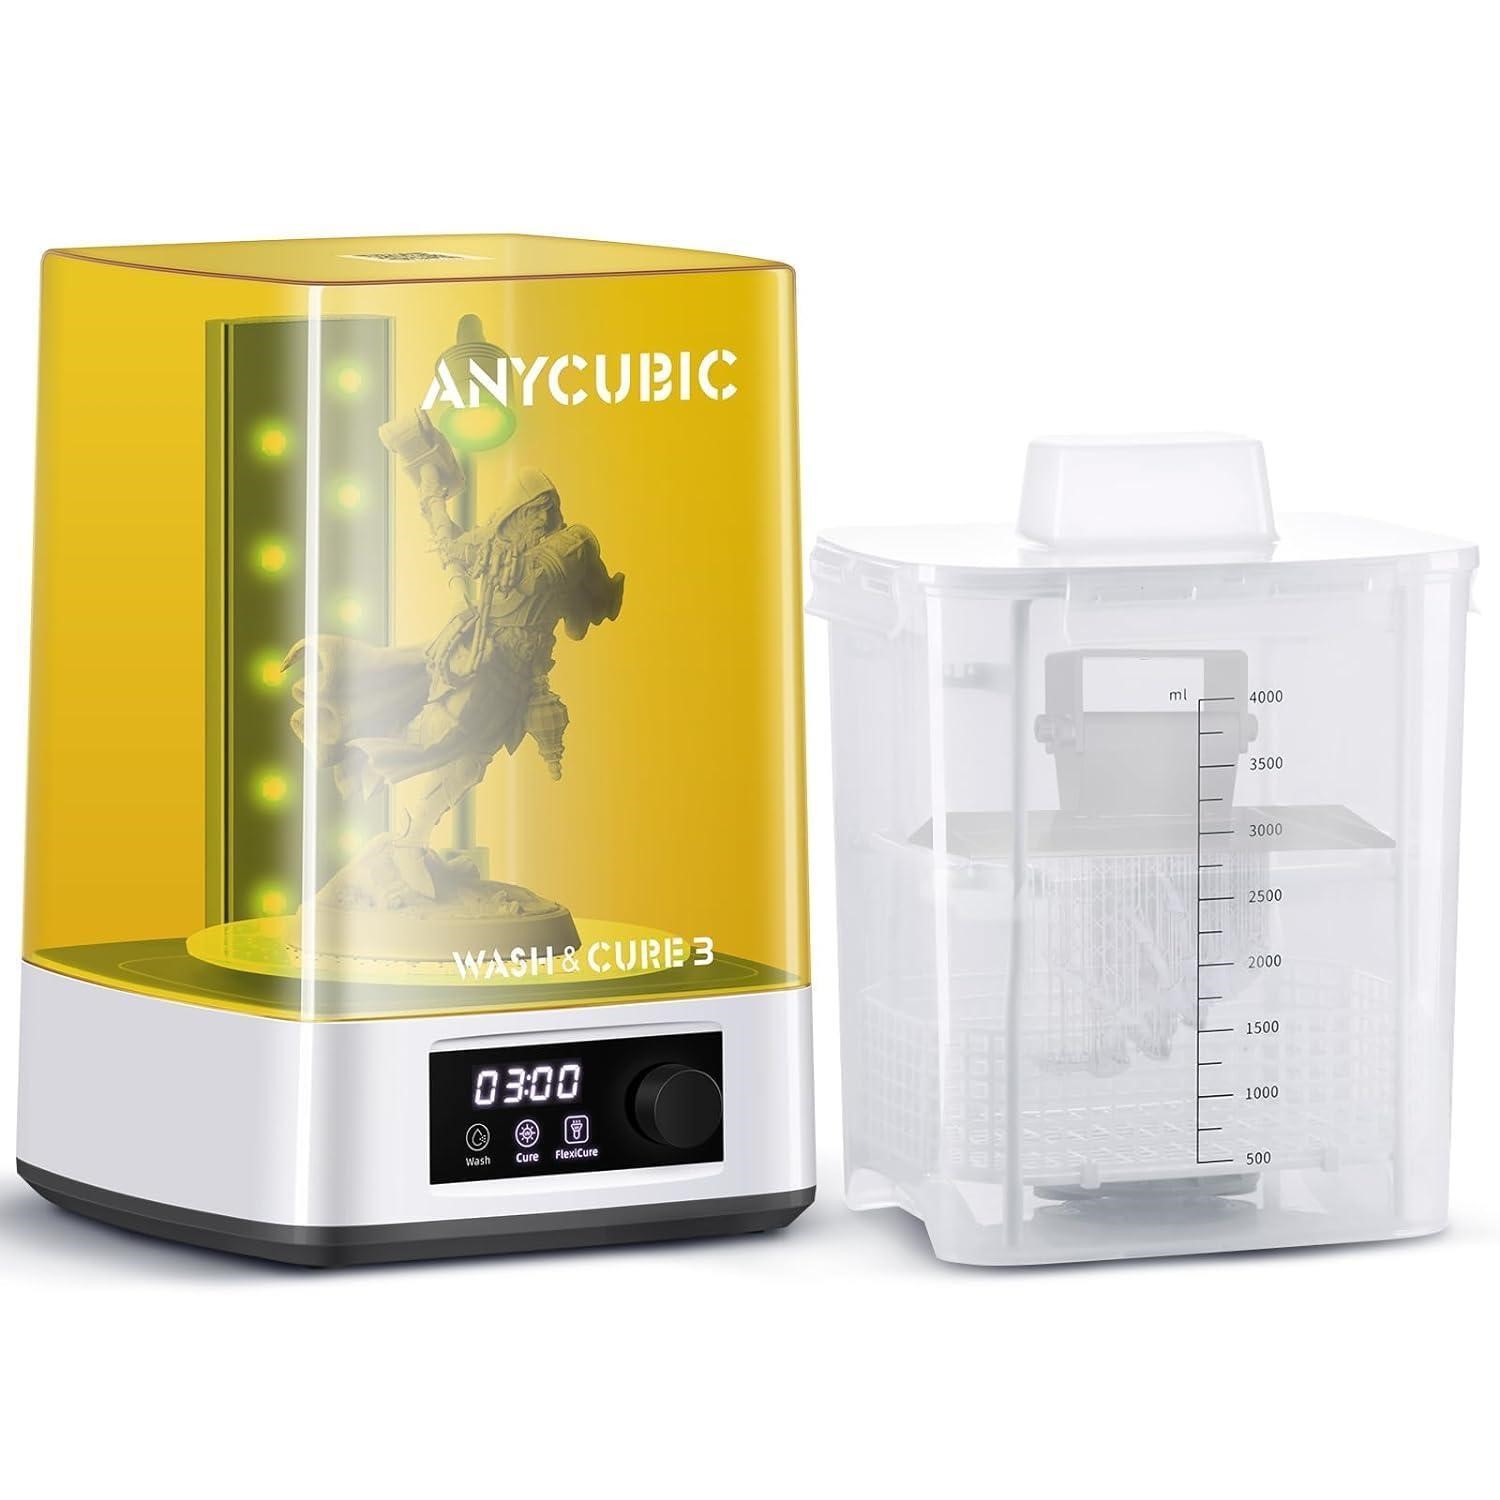 ULN - ANYCUBIC 2 in 1 Wash & Cure 3.0